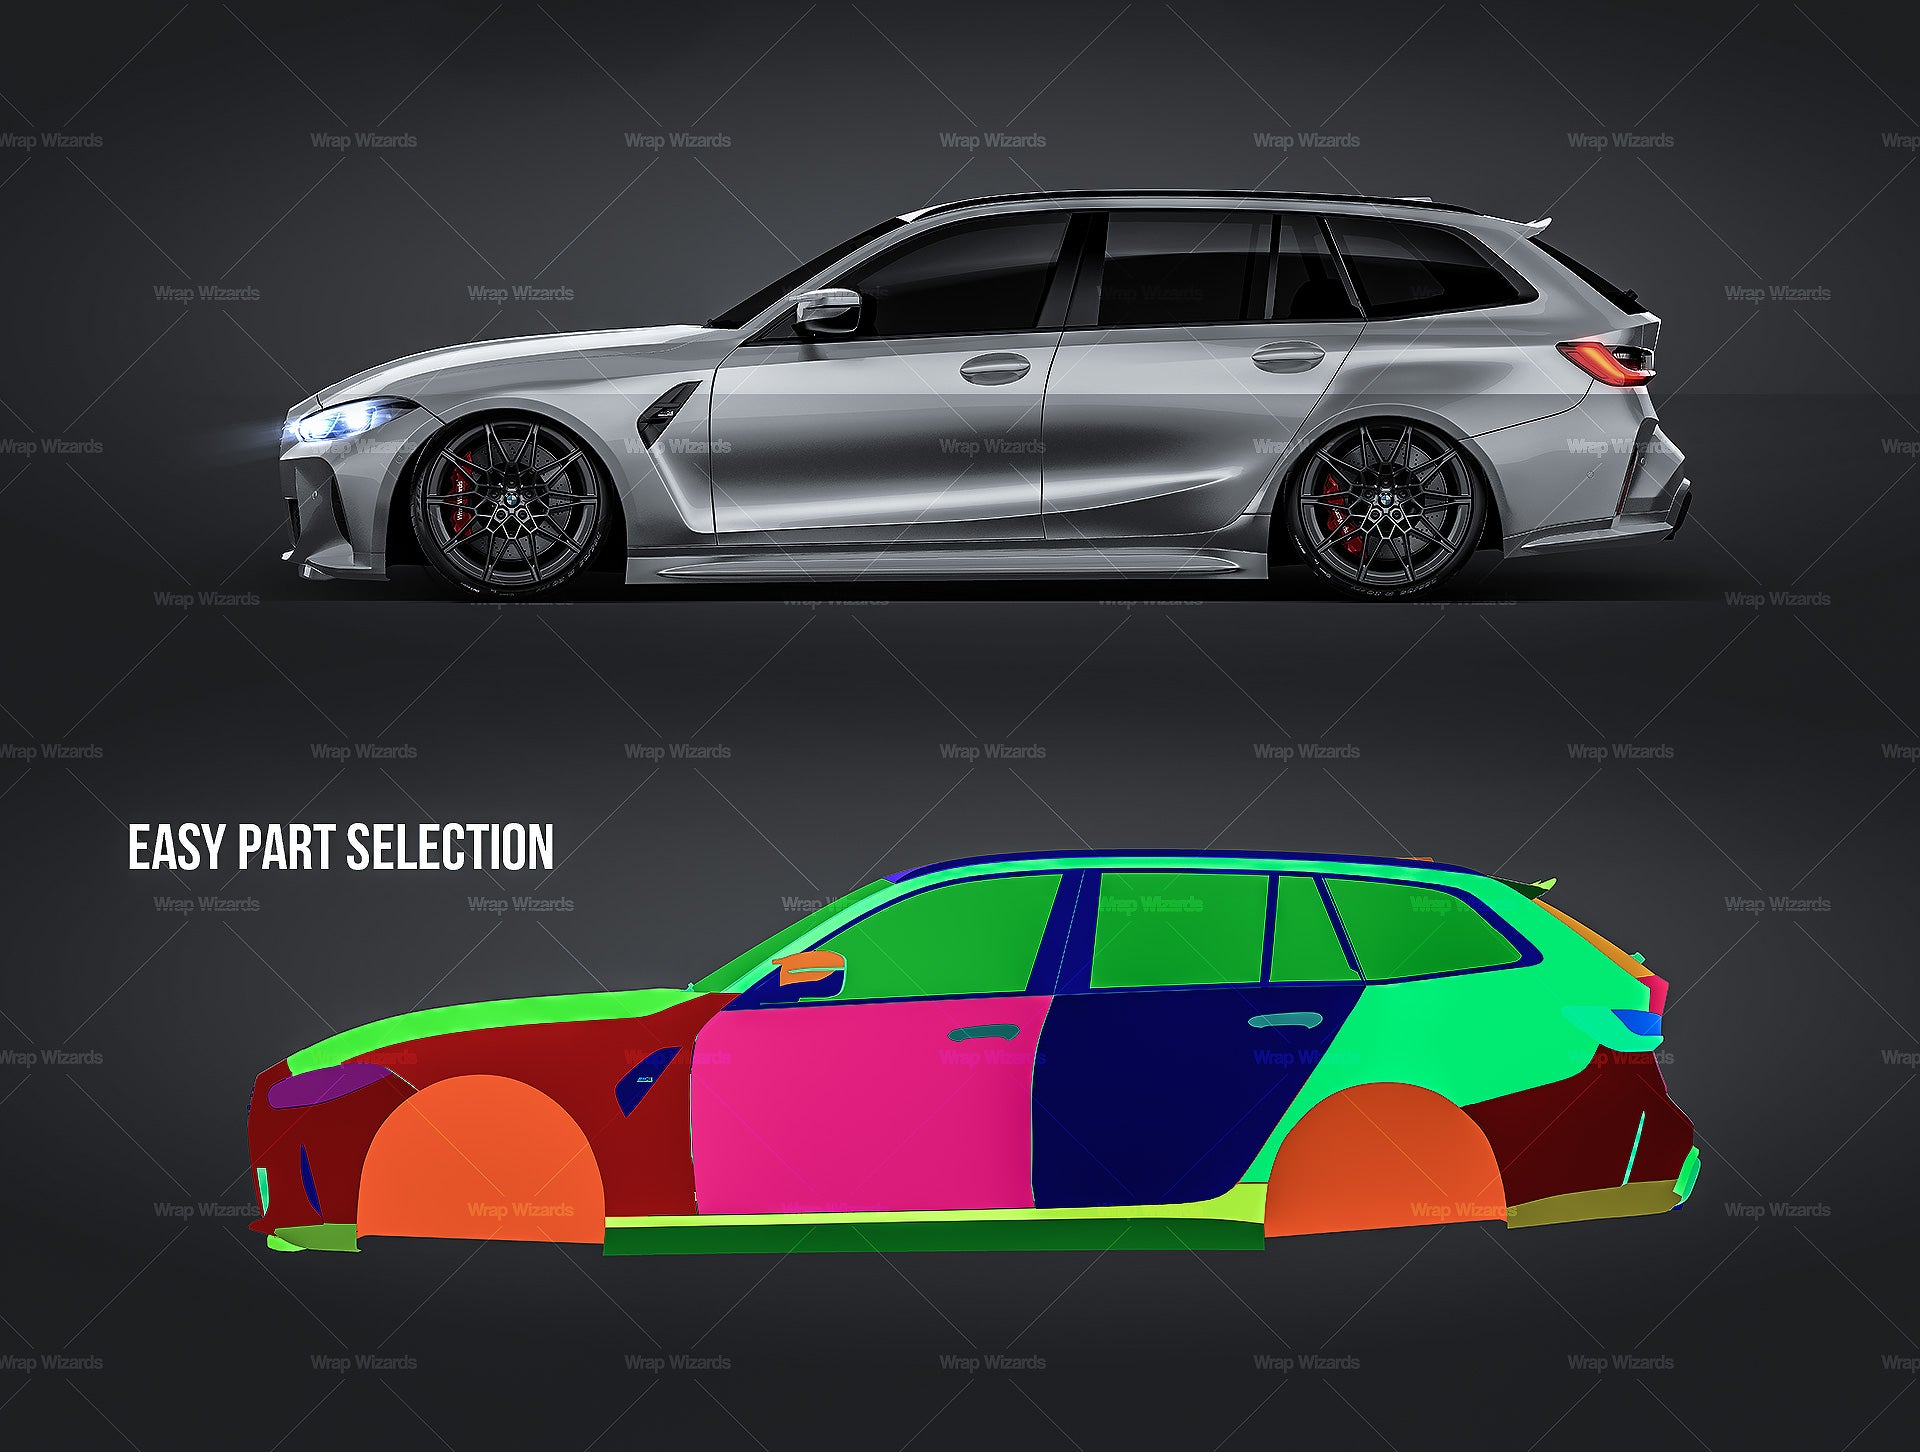 BMW M3 Competition Touring G81 2022 glossy finish - all sides Car Mockup Template.psd